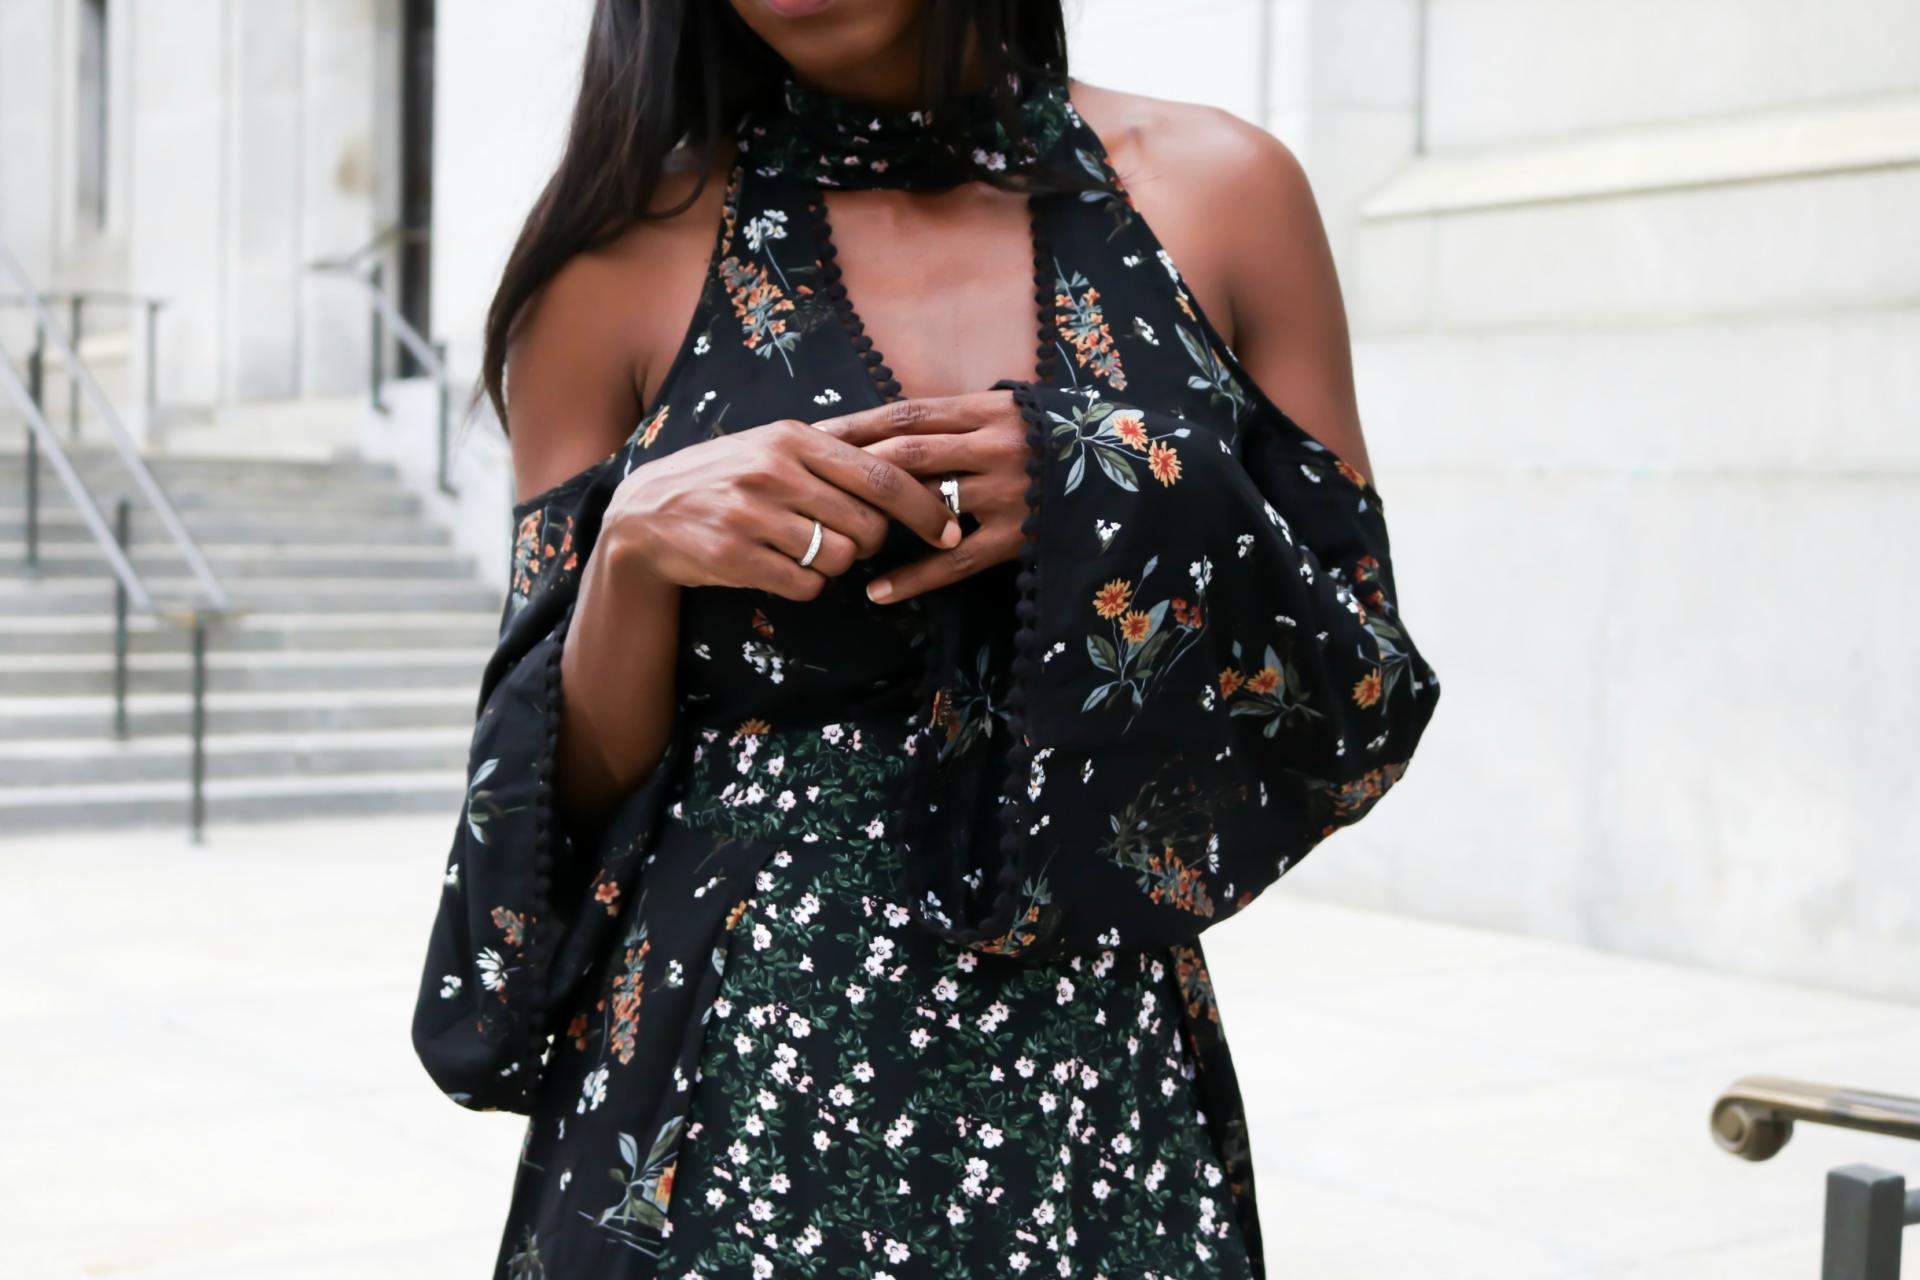 My little love affair with the craziest dress you've ever seen - Fall Transitional Dressing